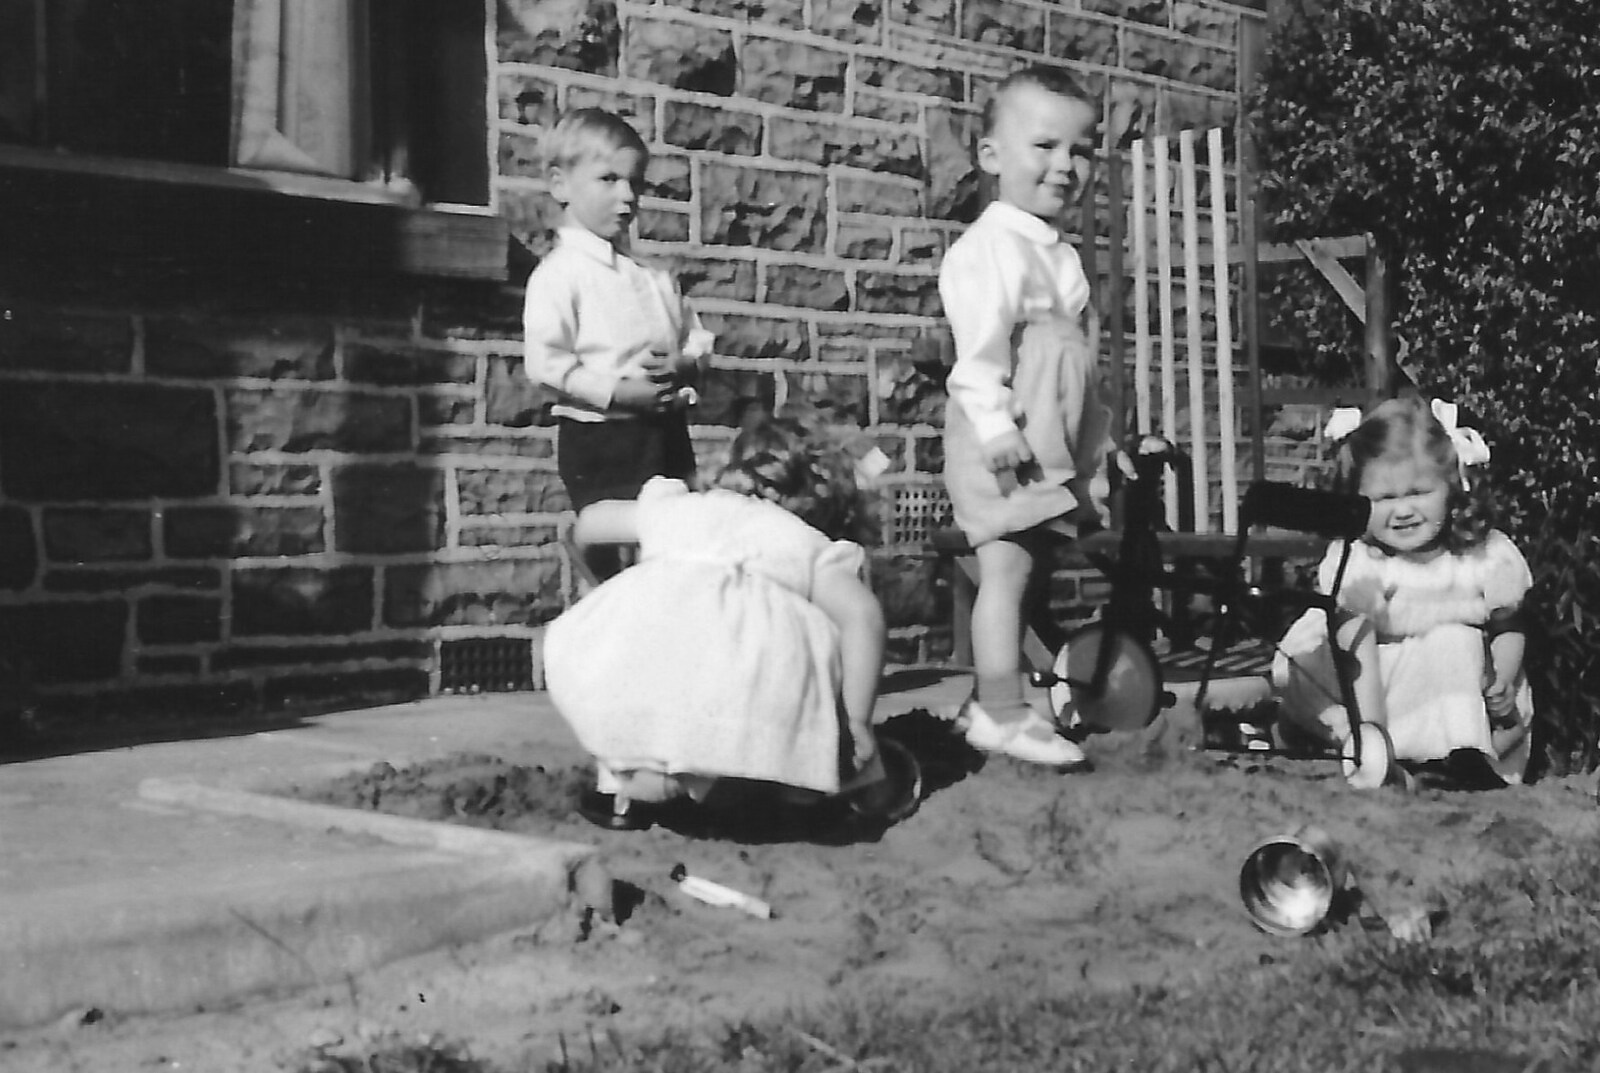 Family History: The 1940s and 1950s - 24th January 2020: A gang of children play outside